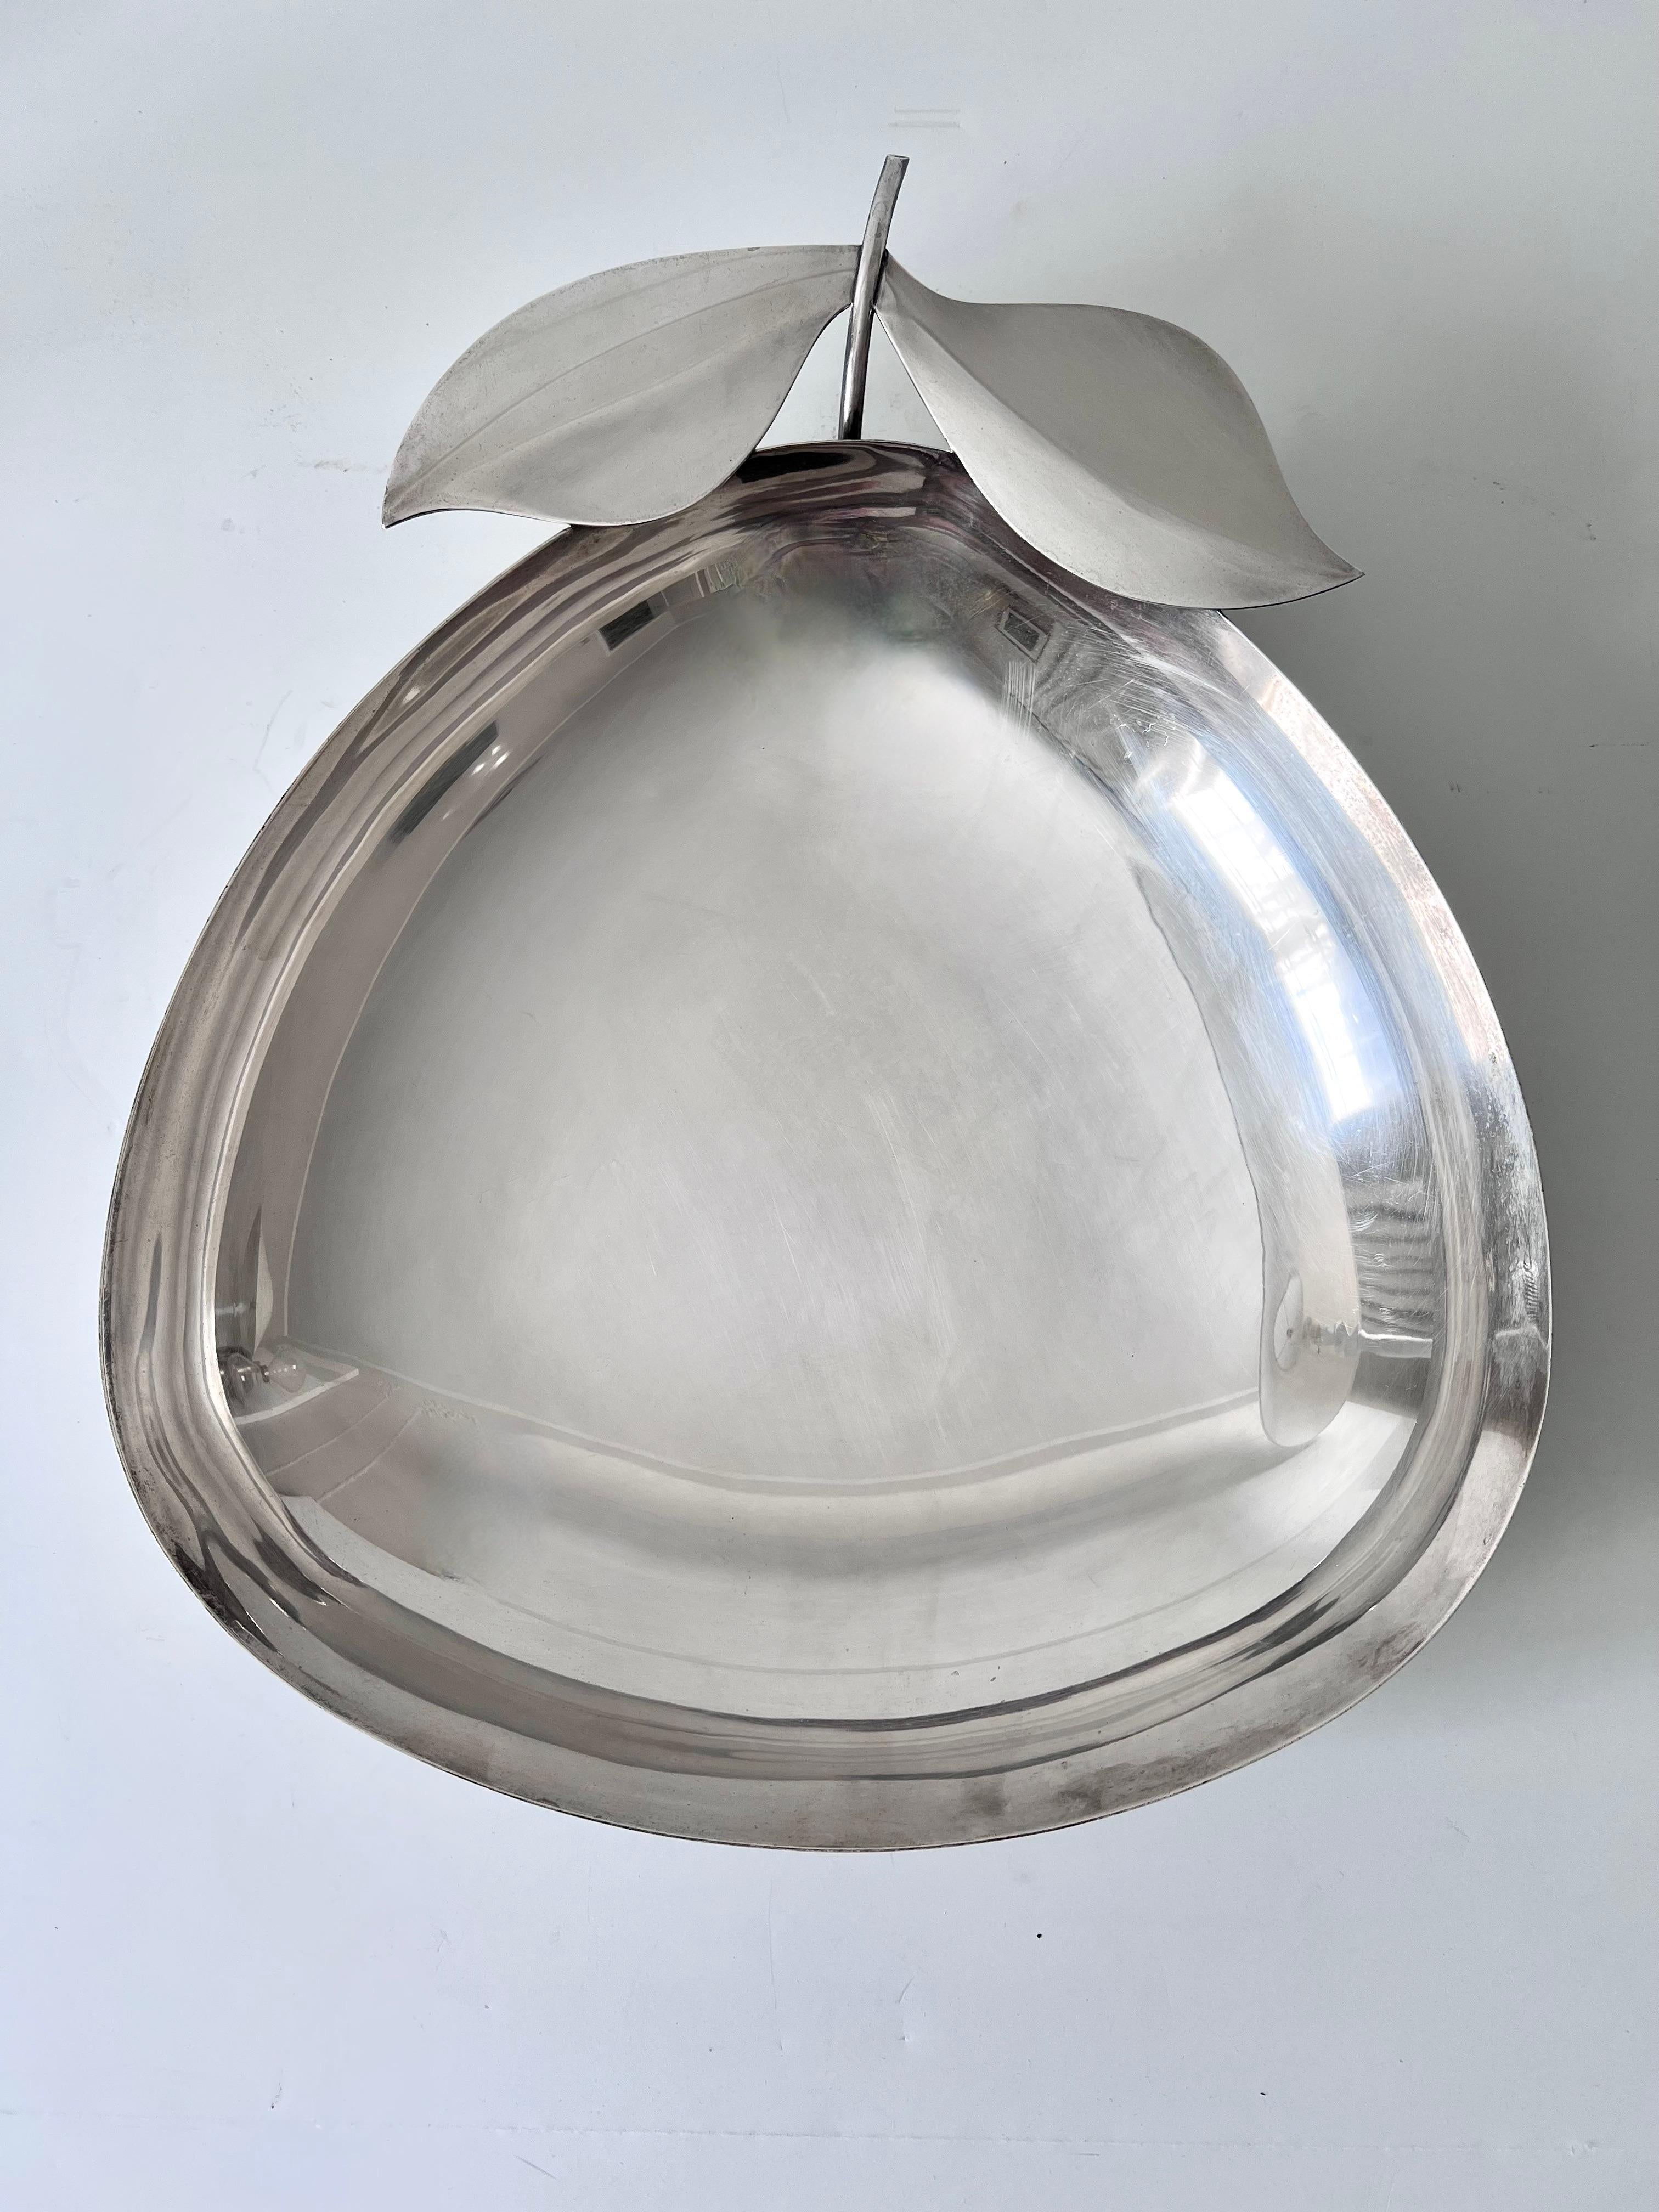 Acquired in Paris, France - a lovely silver plate bowl in the shape of an apple or piece of fruit... a compliment to any cocktail table, the bar, as a serving piece or simply to display. Also a lovely piece to float flowers in. The subtle and